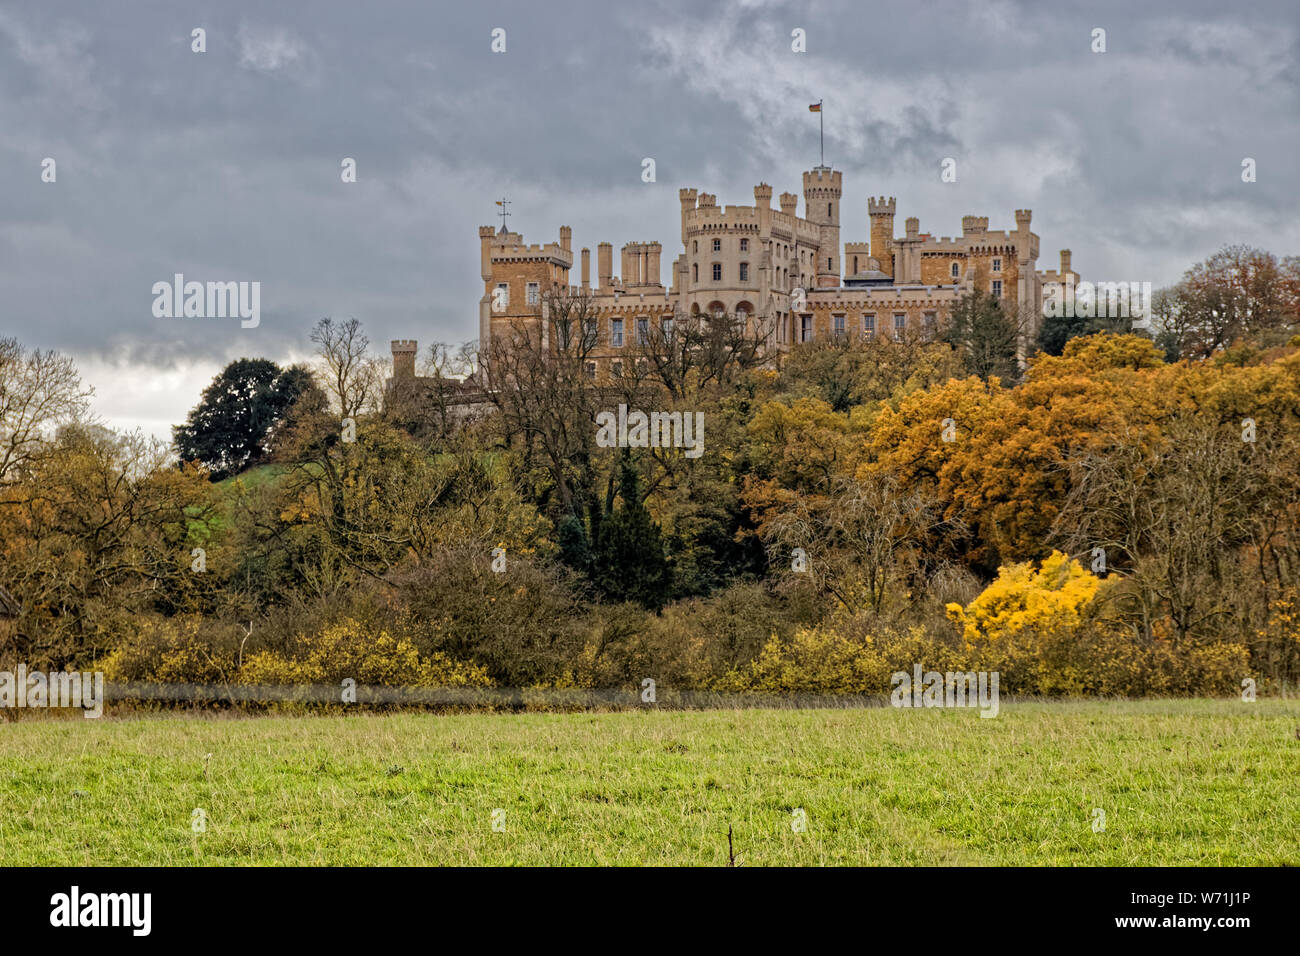 Belvoir Castle,designed by James Wyatt the home of the Manners family and seat of the Dukes of Rutland in the Leicestershire countryside in the autumn Stock Photo